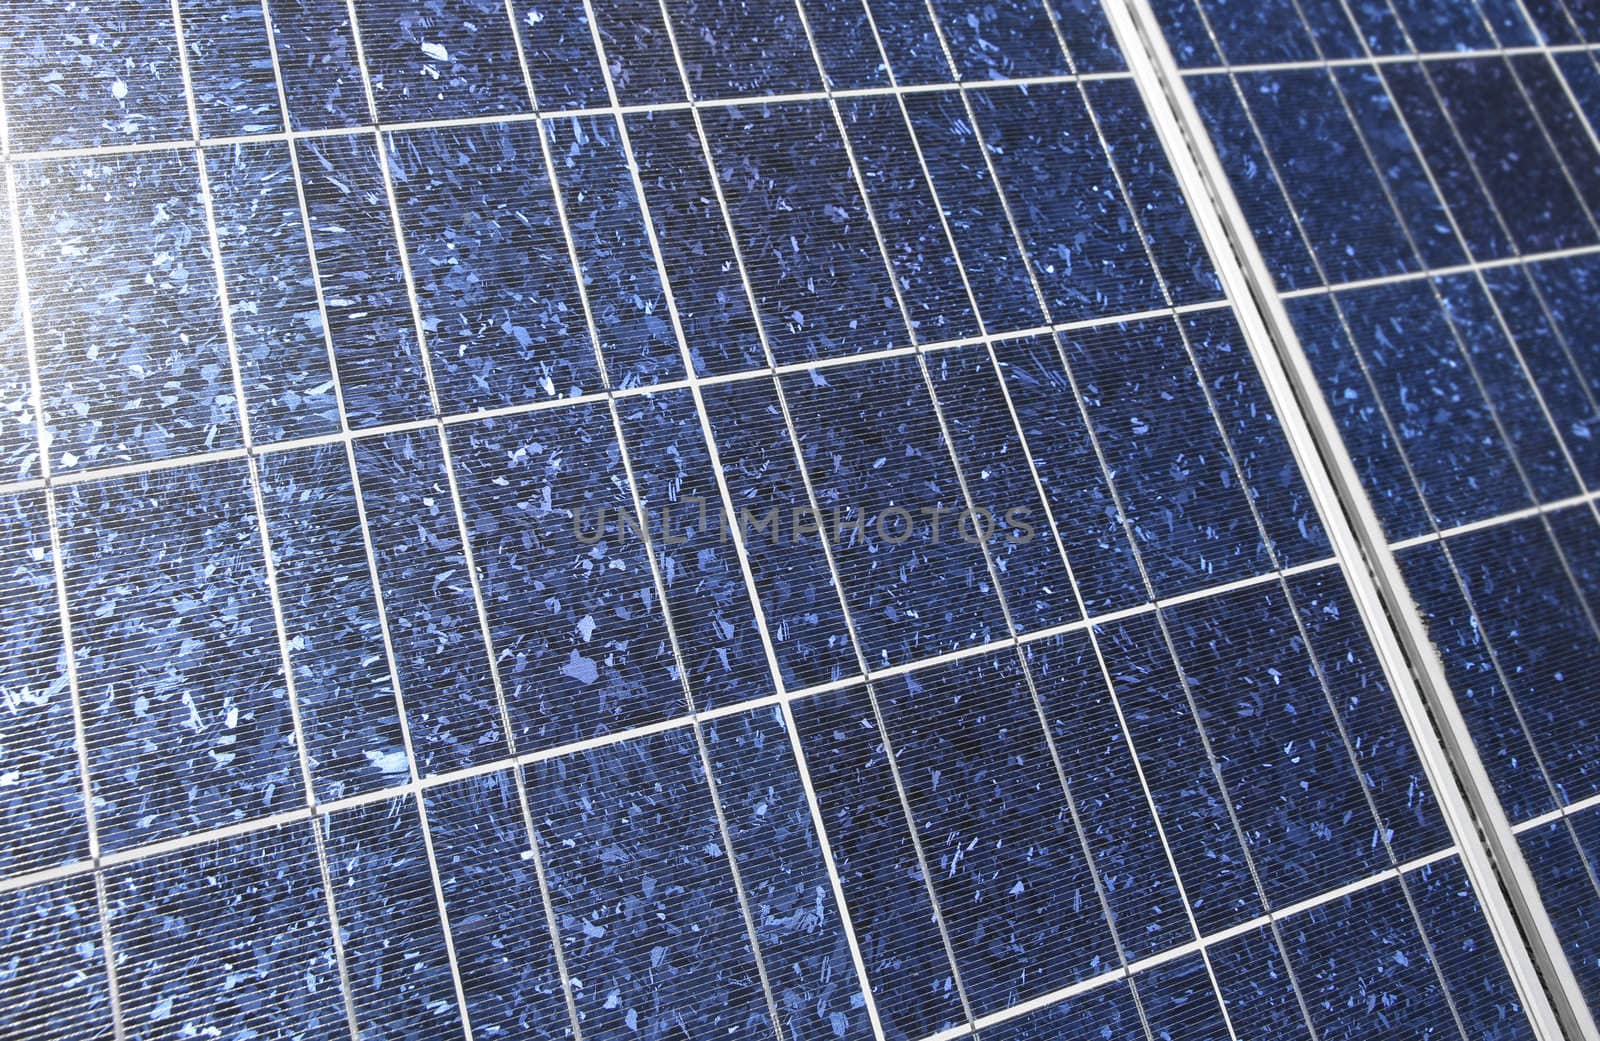 Solar panel detail by daboost